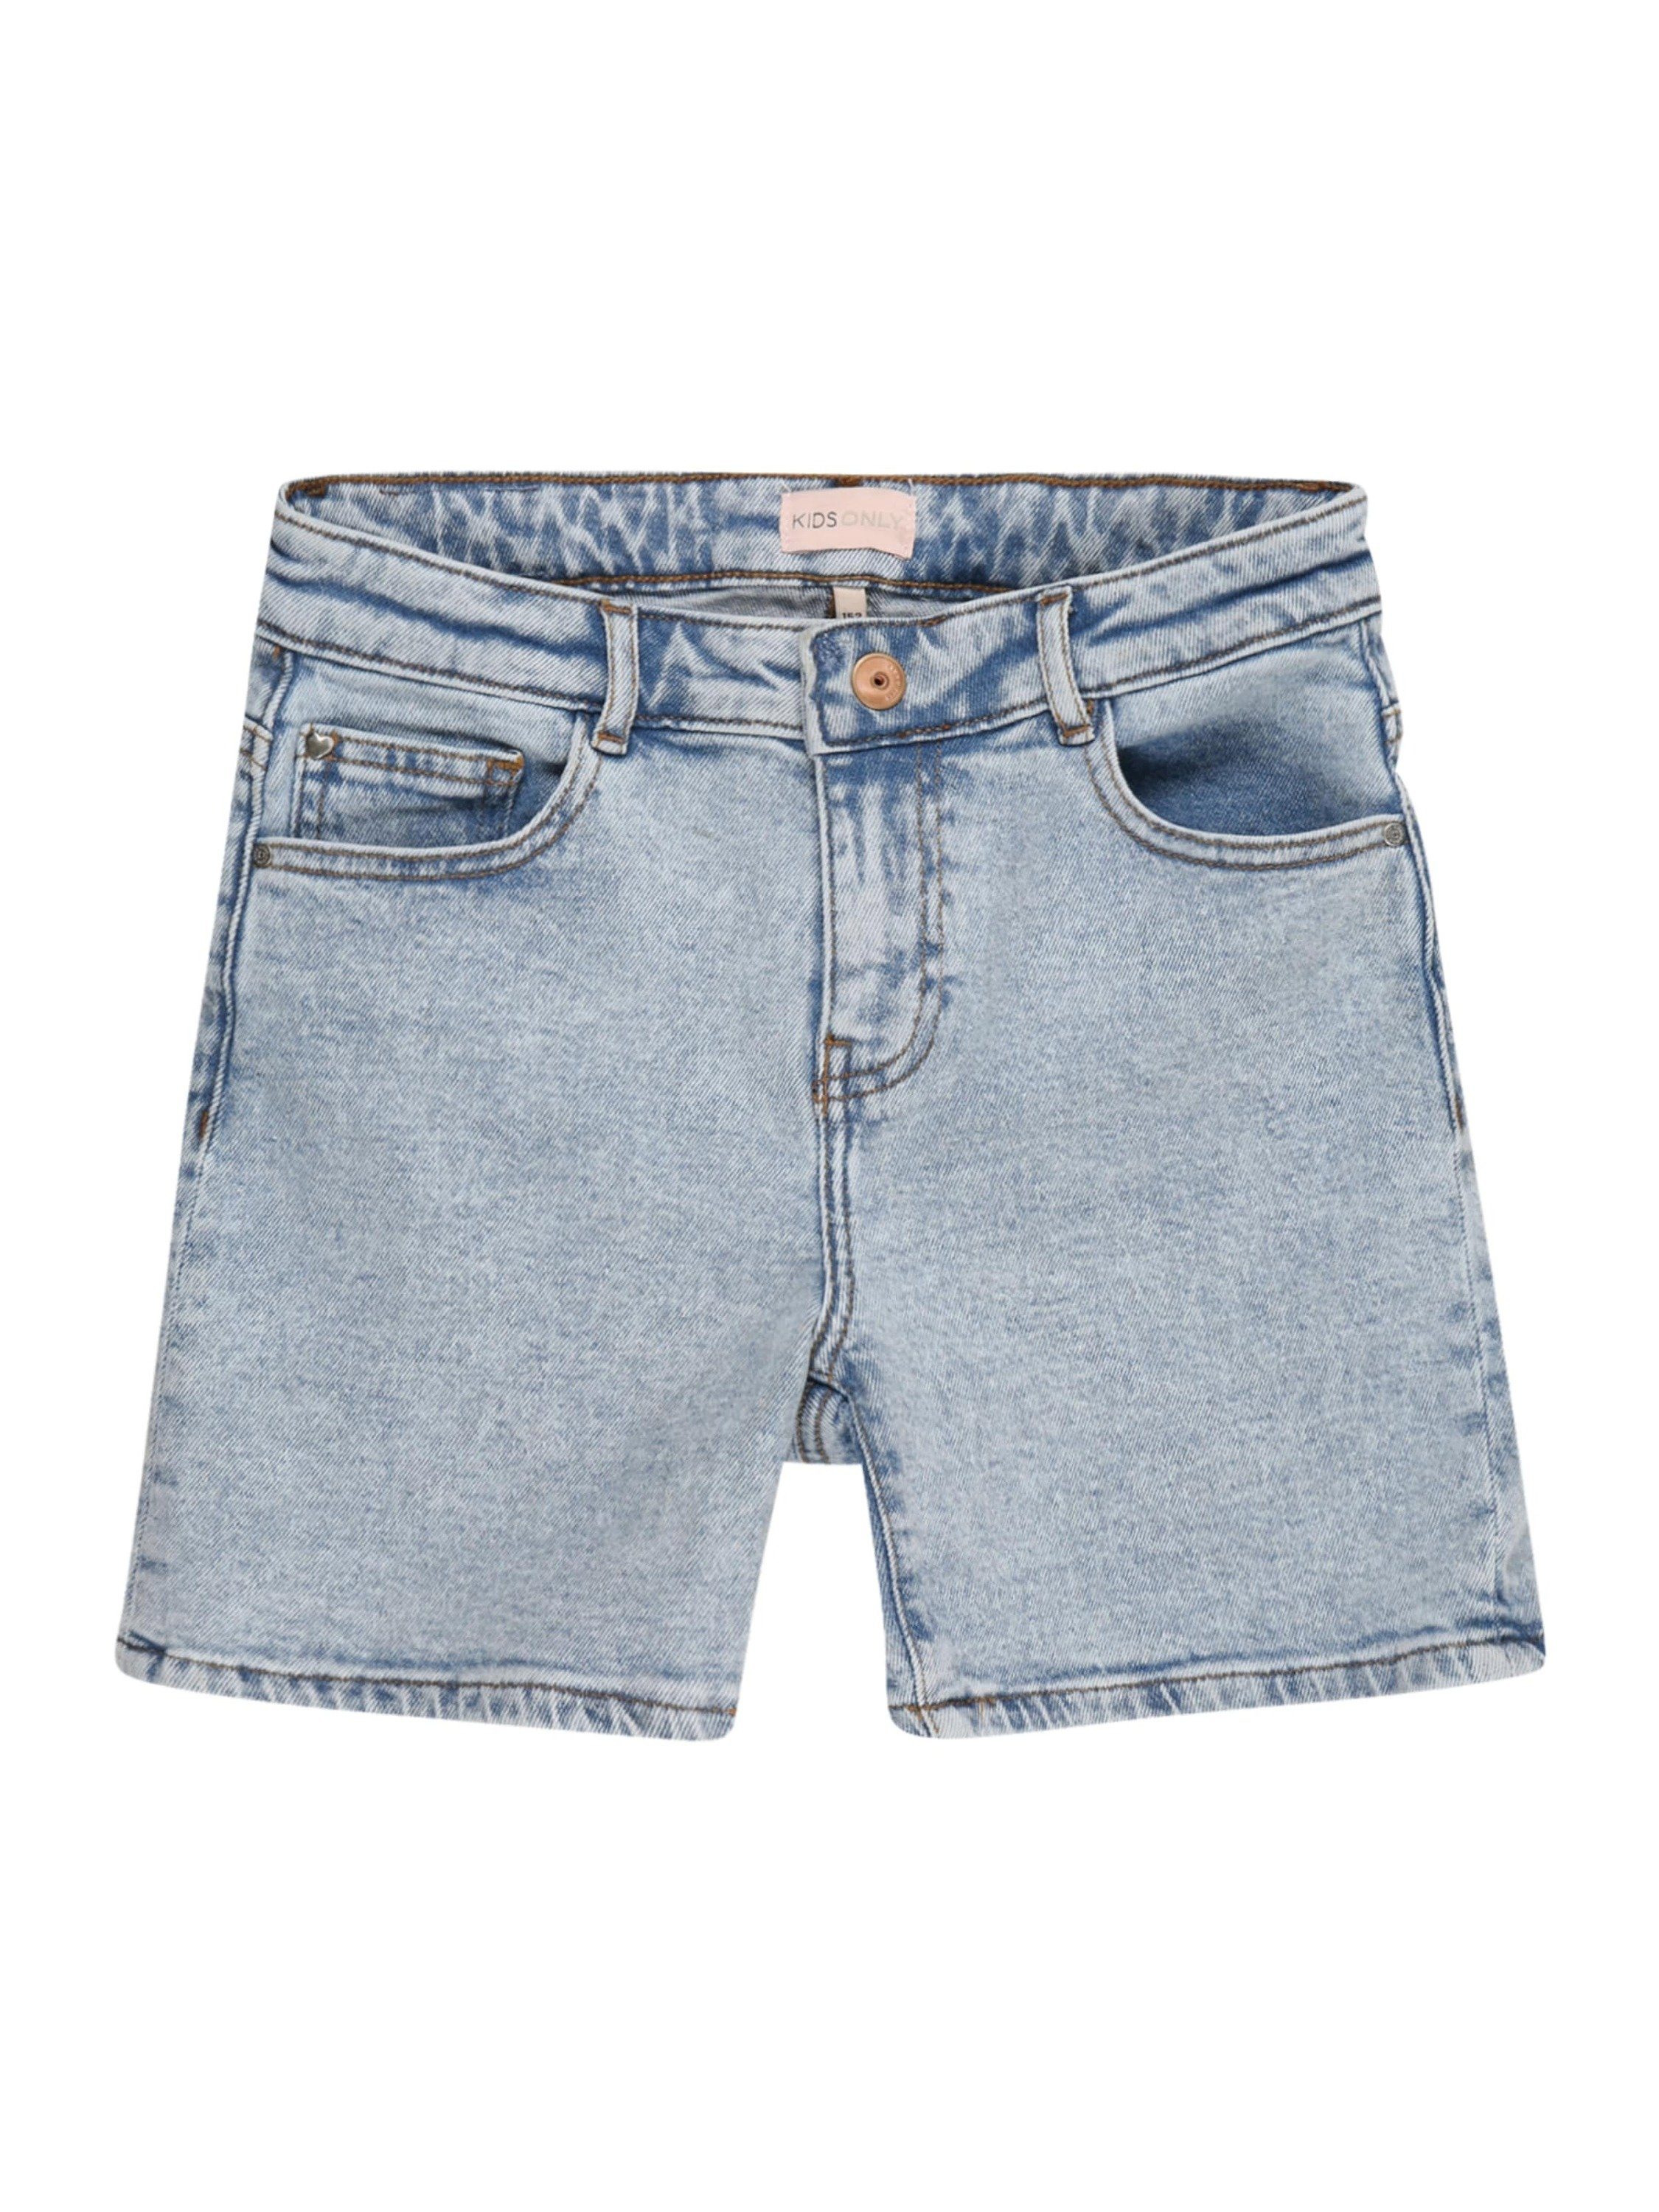 Flag KONPHINE, Label ONLY KIDS Jeansshorts Patch/Label